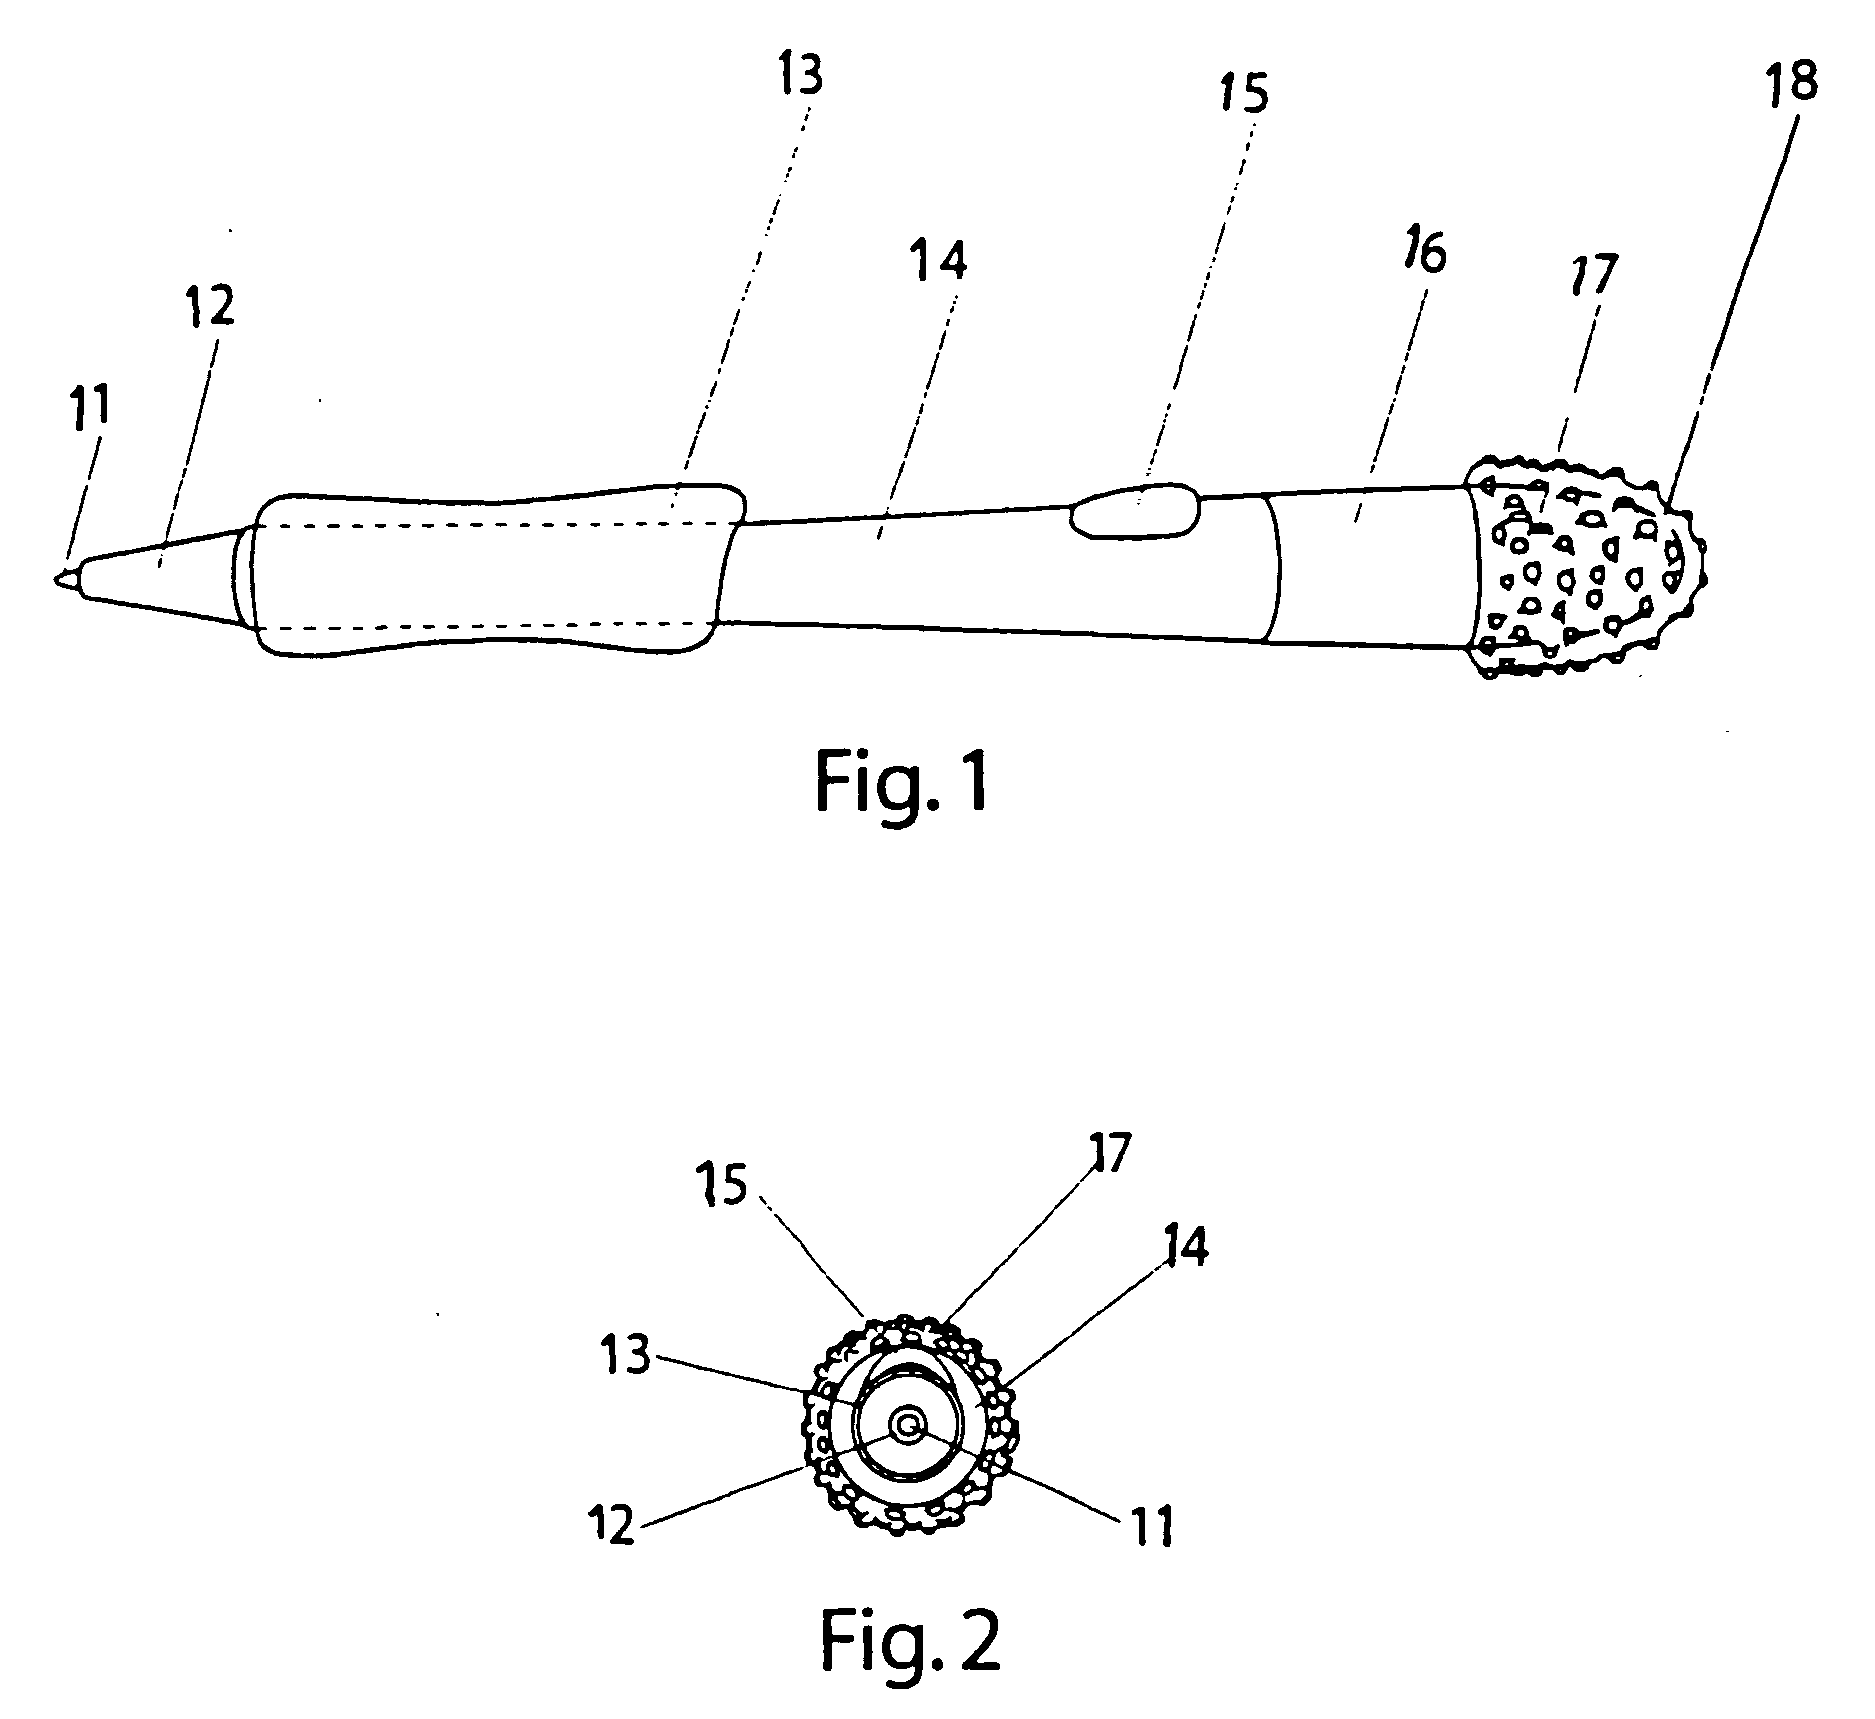 Writing implement with page-turning element